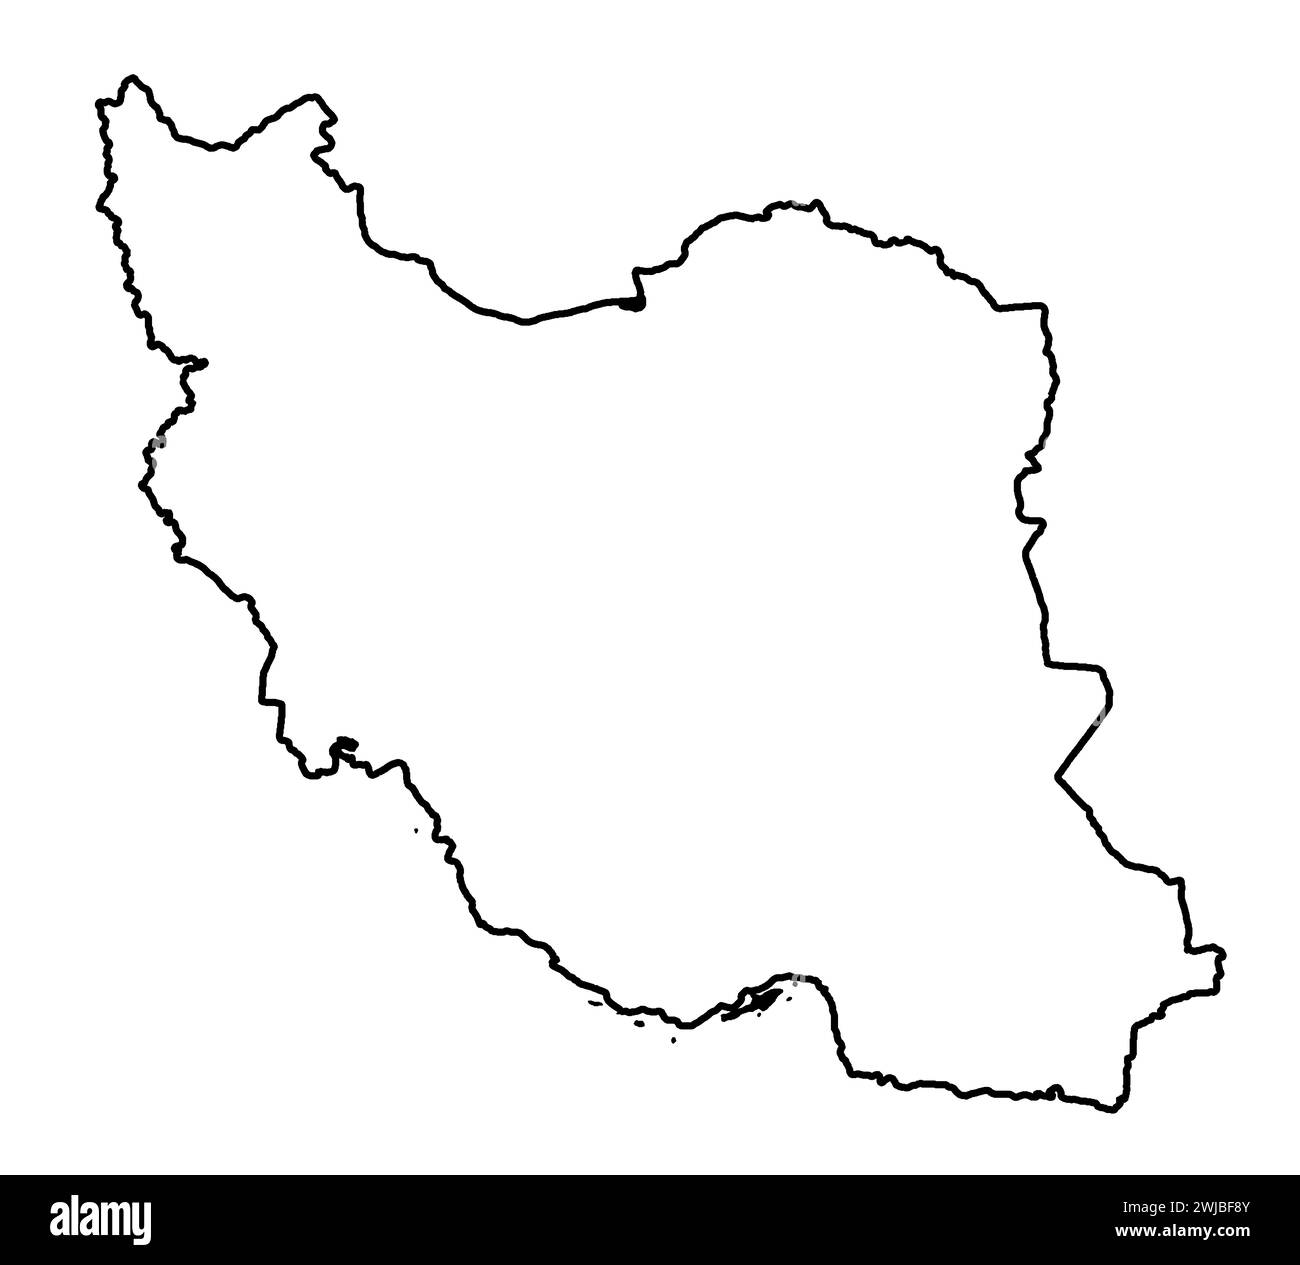 An Outline silhouette map of Iran over a white background Stock Photo